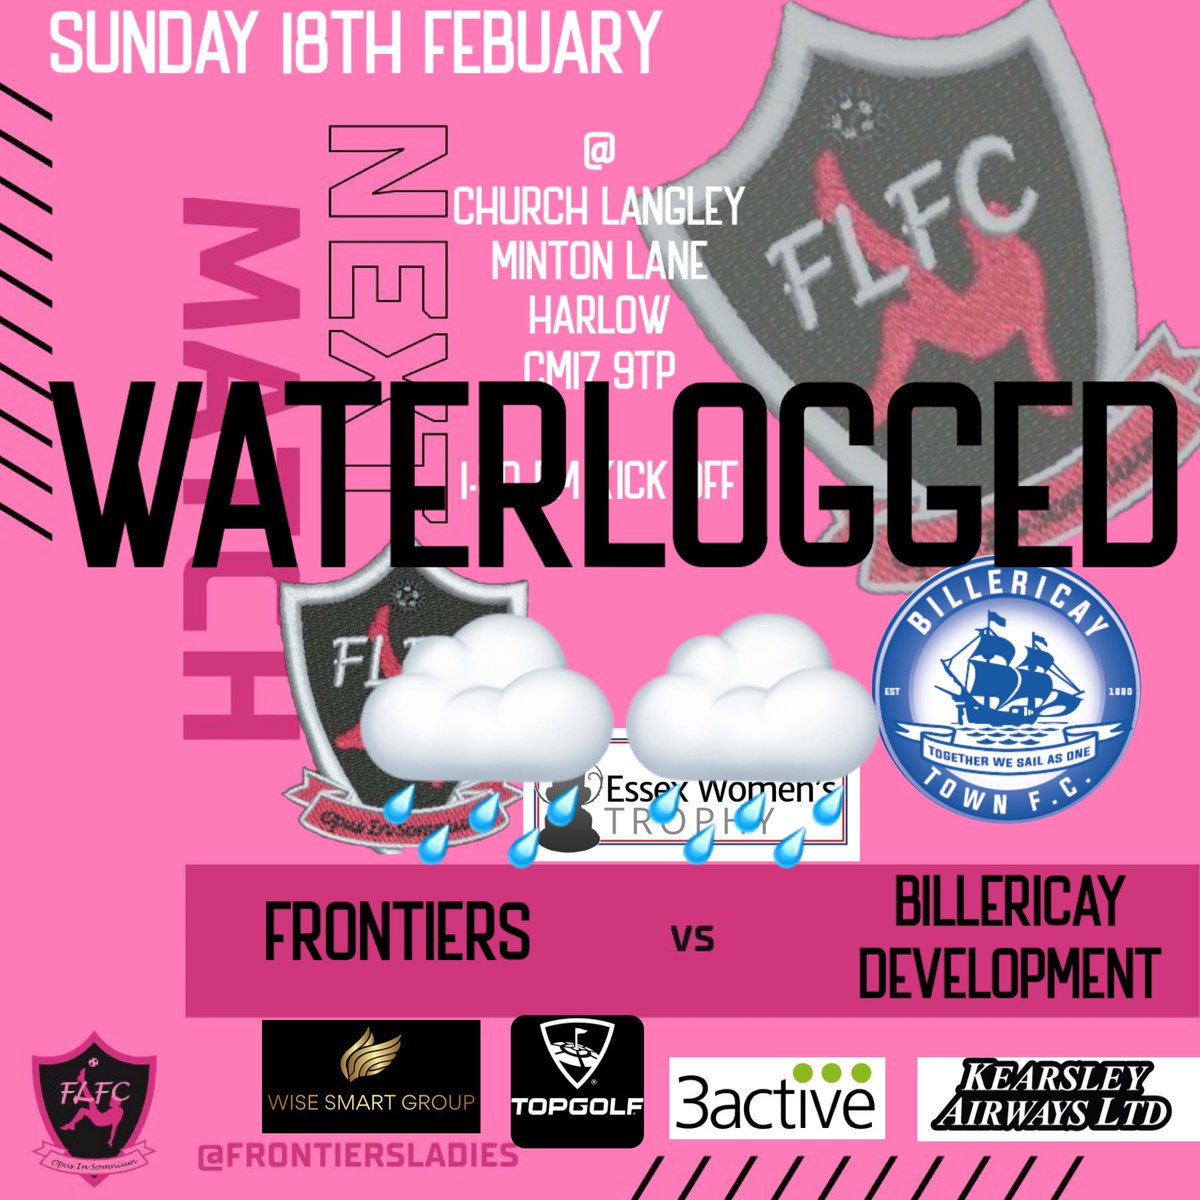 Unfortunately with all the rain over night our game vs @BTFCDevelopment has been postponed